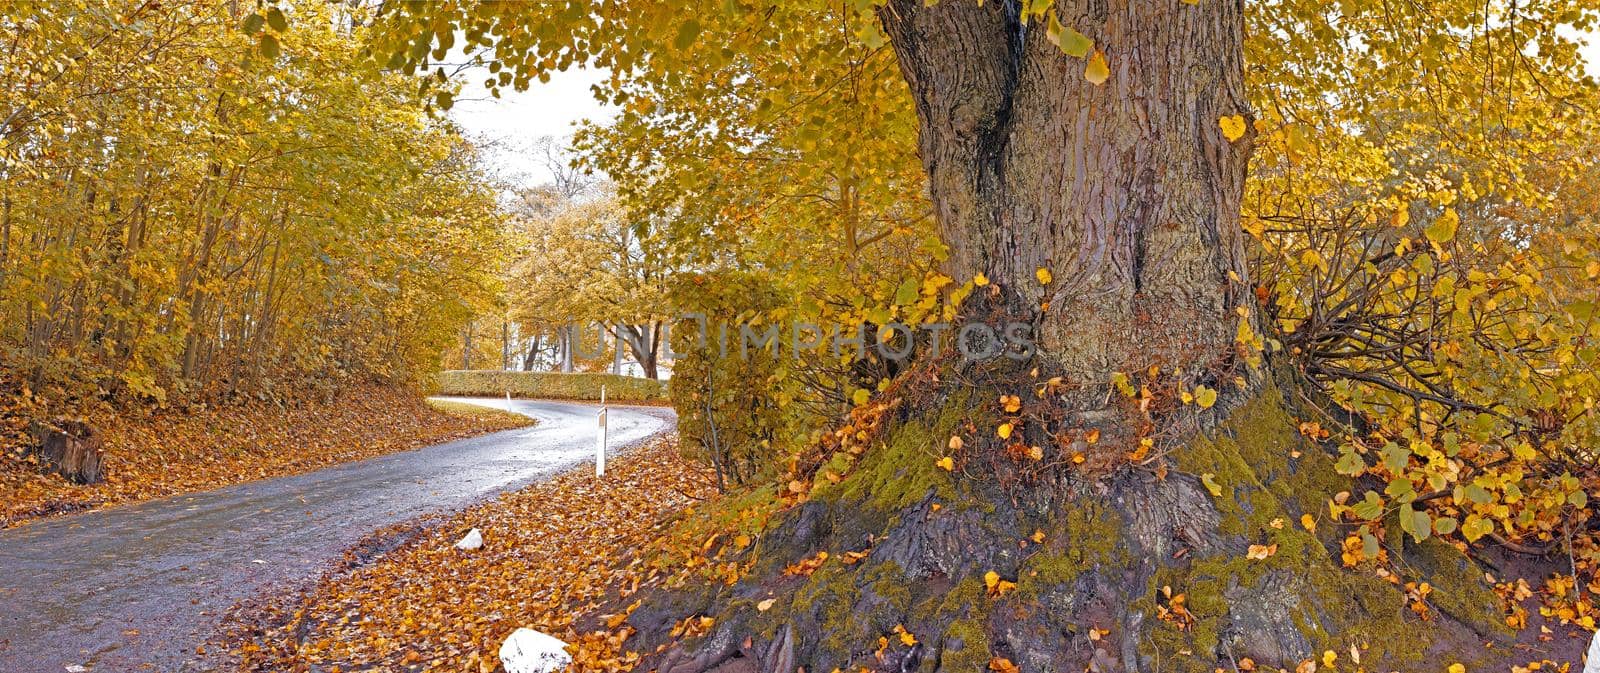 Landscape view of tar road street leading through autumn beech tree forest in Norway. Scenic rural countryside of nature woods in environmental conservation reserve. Travel through zen mother nature.